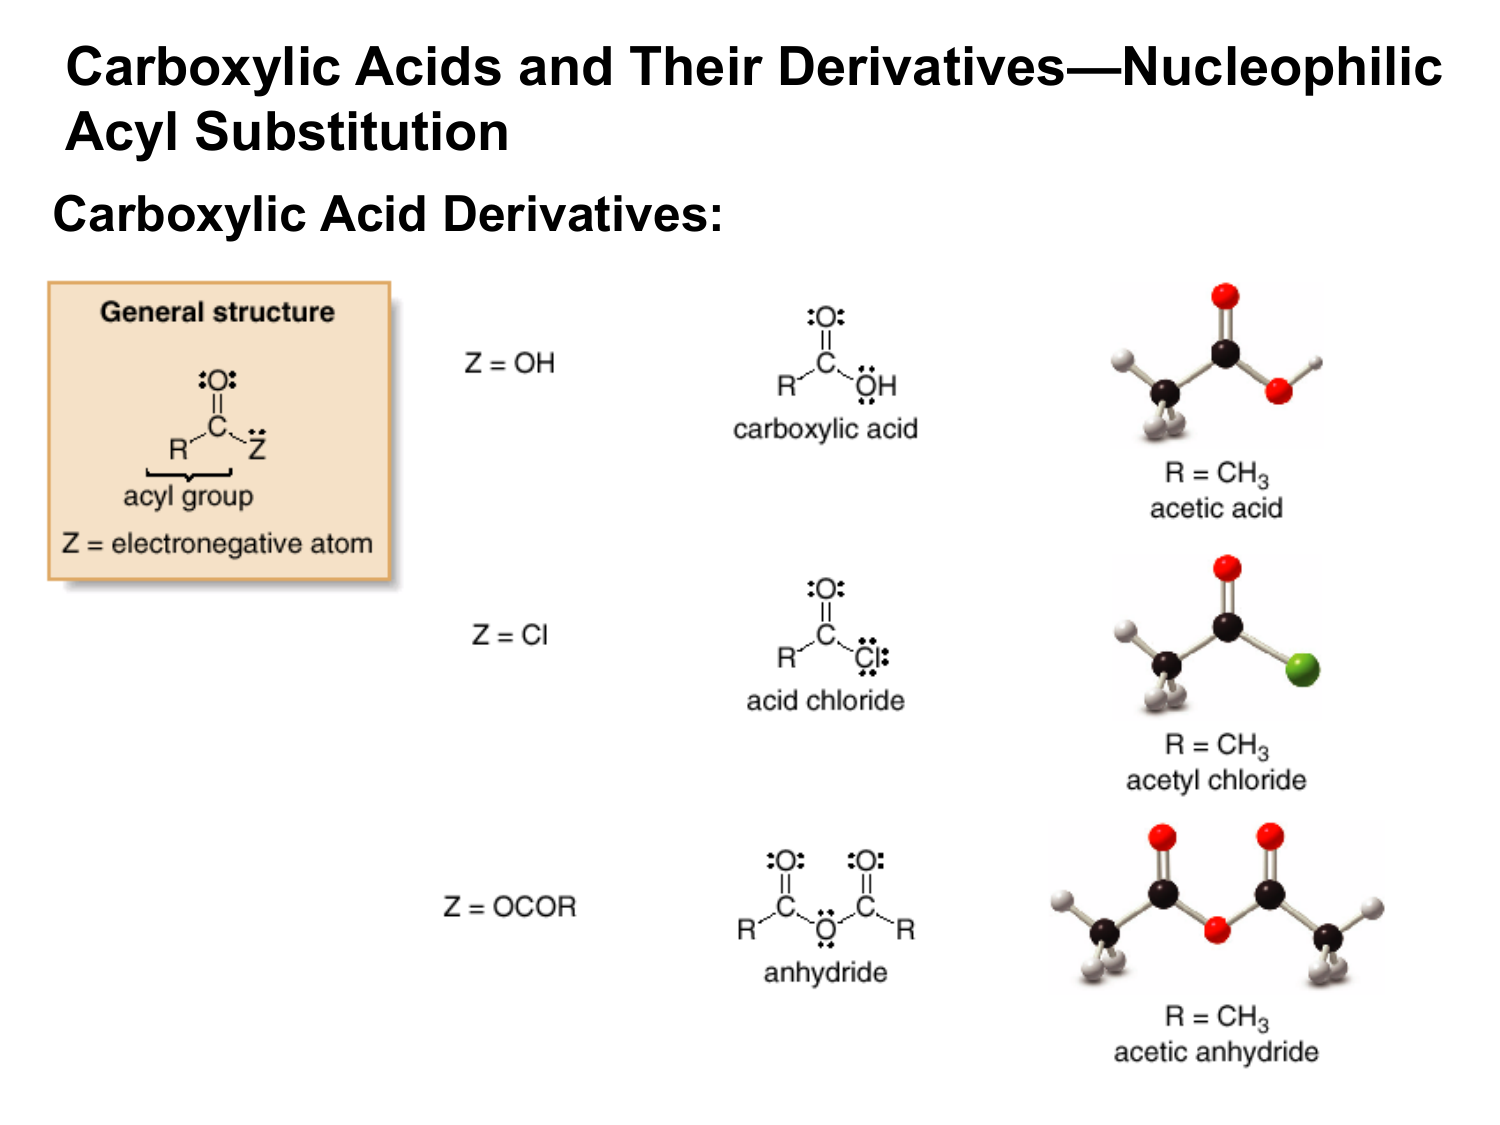 Their derivatives. Carboxylic acid structure. Reactivity of carboxylic acids. The nomenclature of carboxylic acids. Carboxylic acid derivatives are.